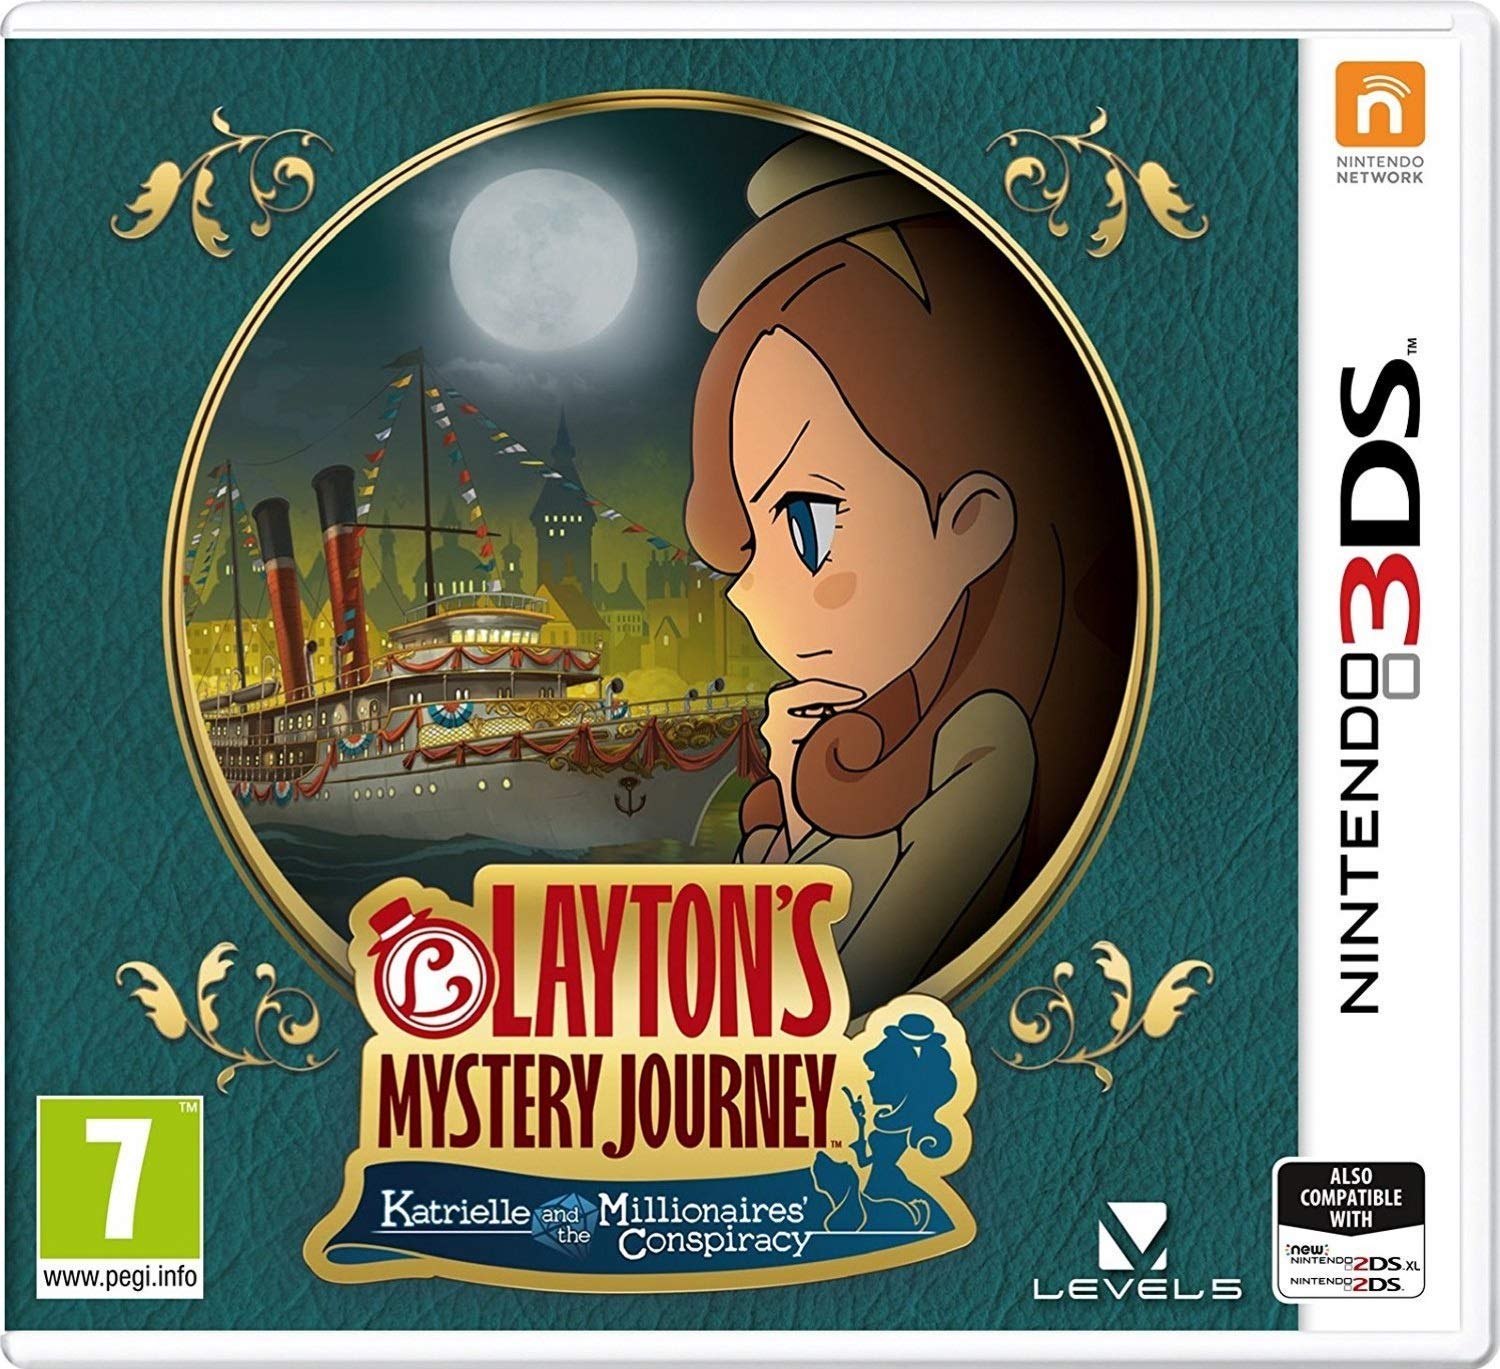 LAYTON'S MYSTERY JOURNEY: Katrielle and